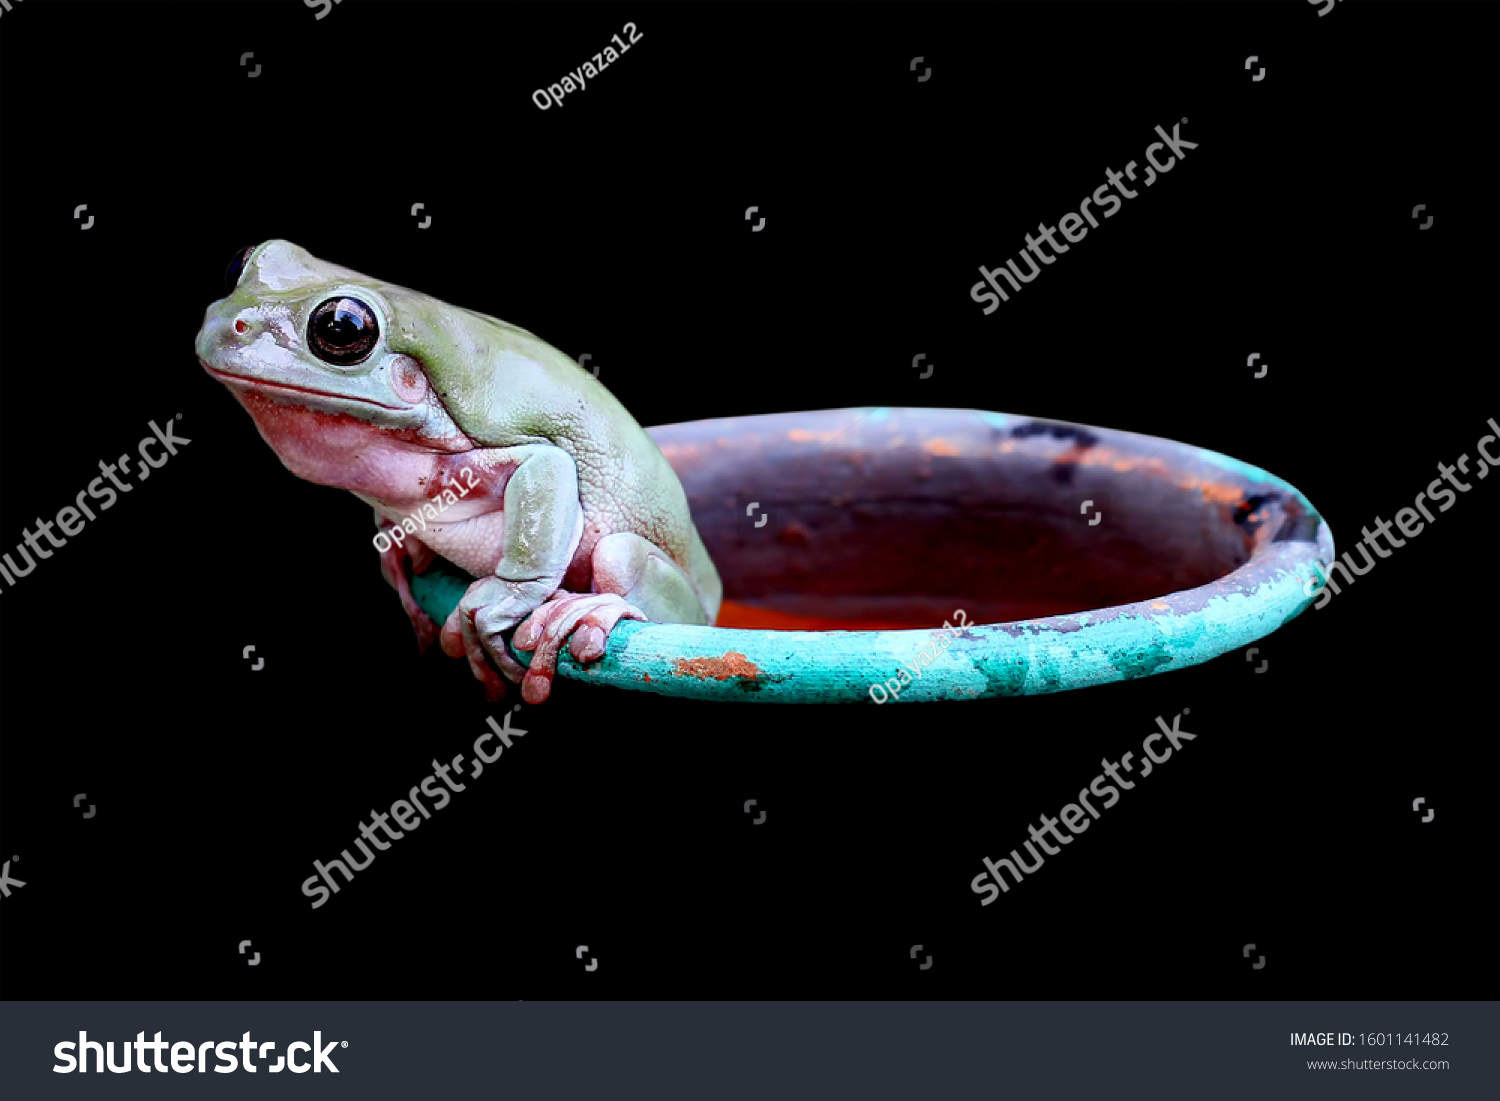 Stock Photo Dumpy Frog Green Tree Frog Want To Out Of The Hole 1601141482 